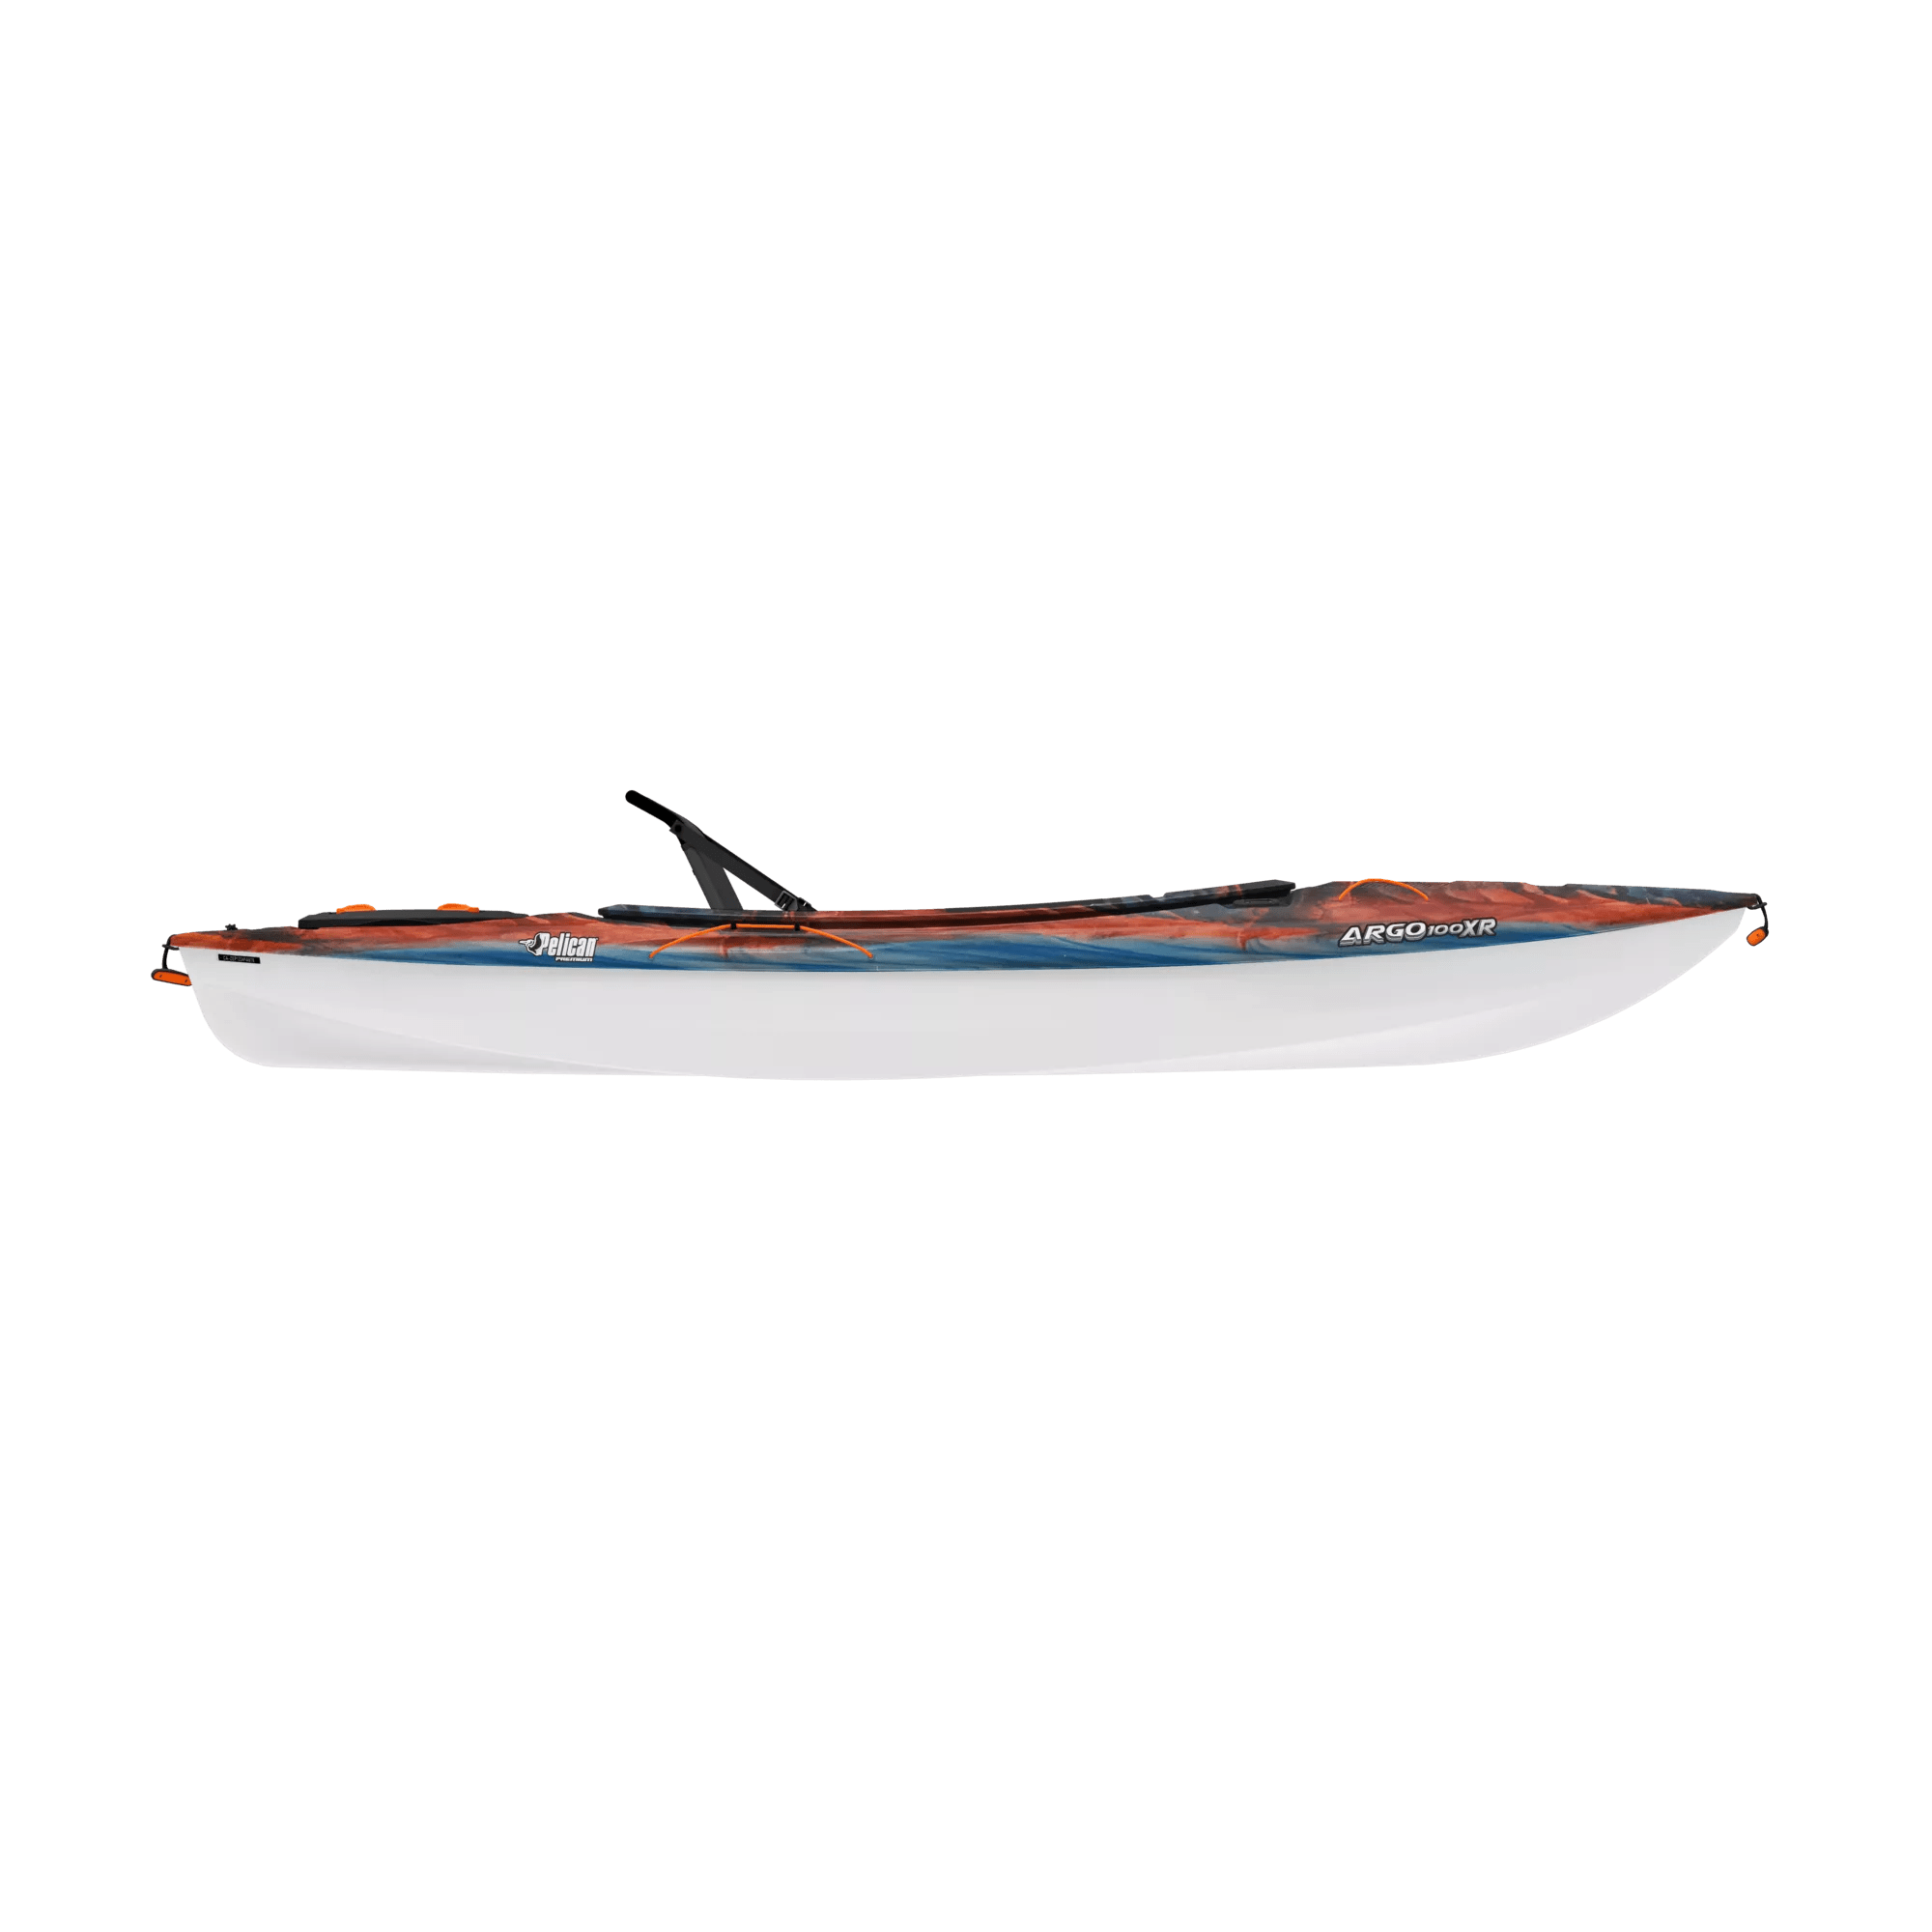 PELICAN - Argo 100XR Recreational Kayak with Paddle - Blue - MDP10P900-00 - SIDE